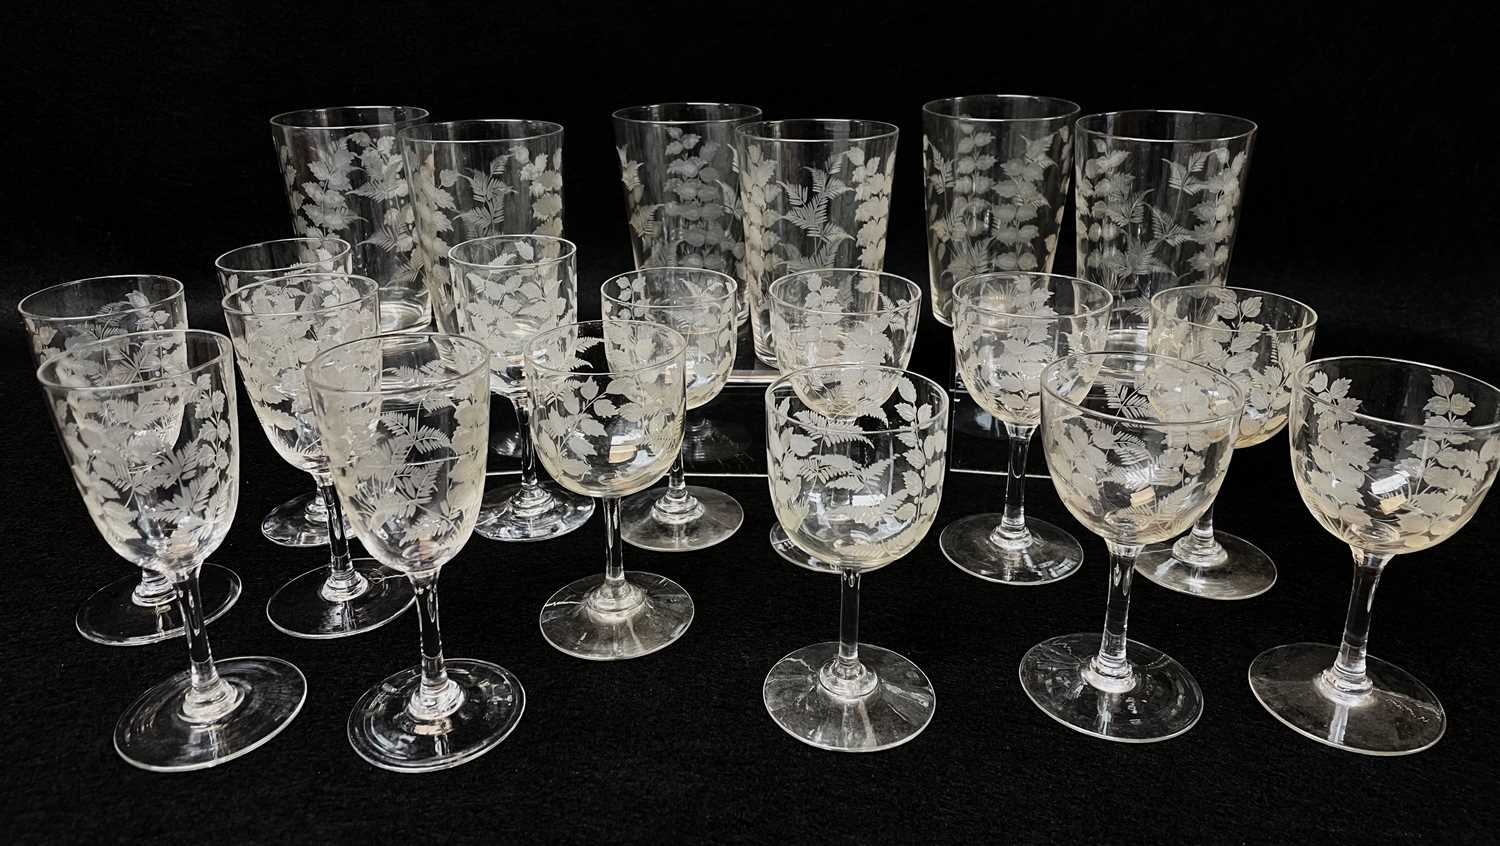 SUITE OF FOLIATE ENGRAVED GLASSWARE, comprising 8 sherry glasses, 6 port glasses and 6 water beakers